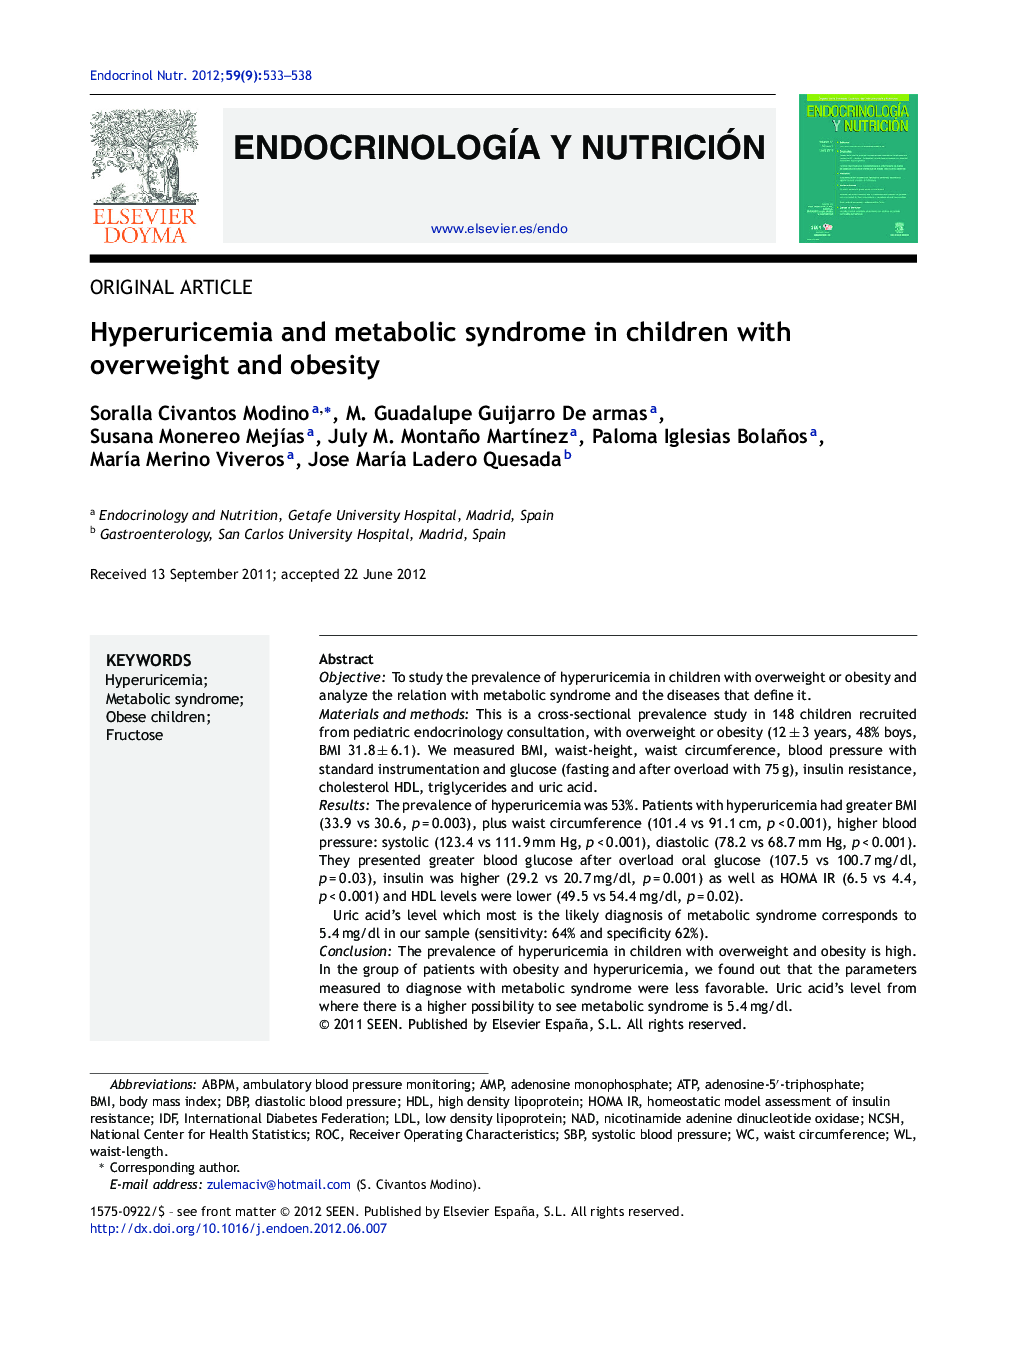 Hyperuricemia and metabolic syndrome in children with overweight and obesity